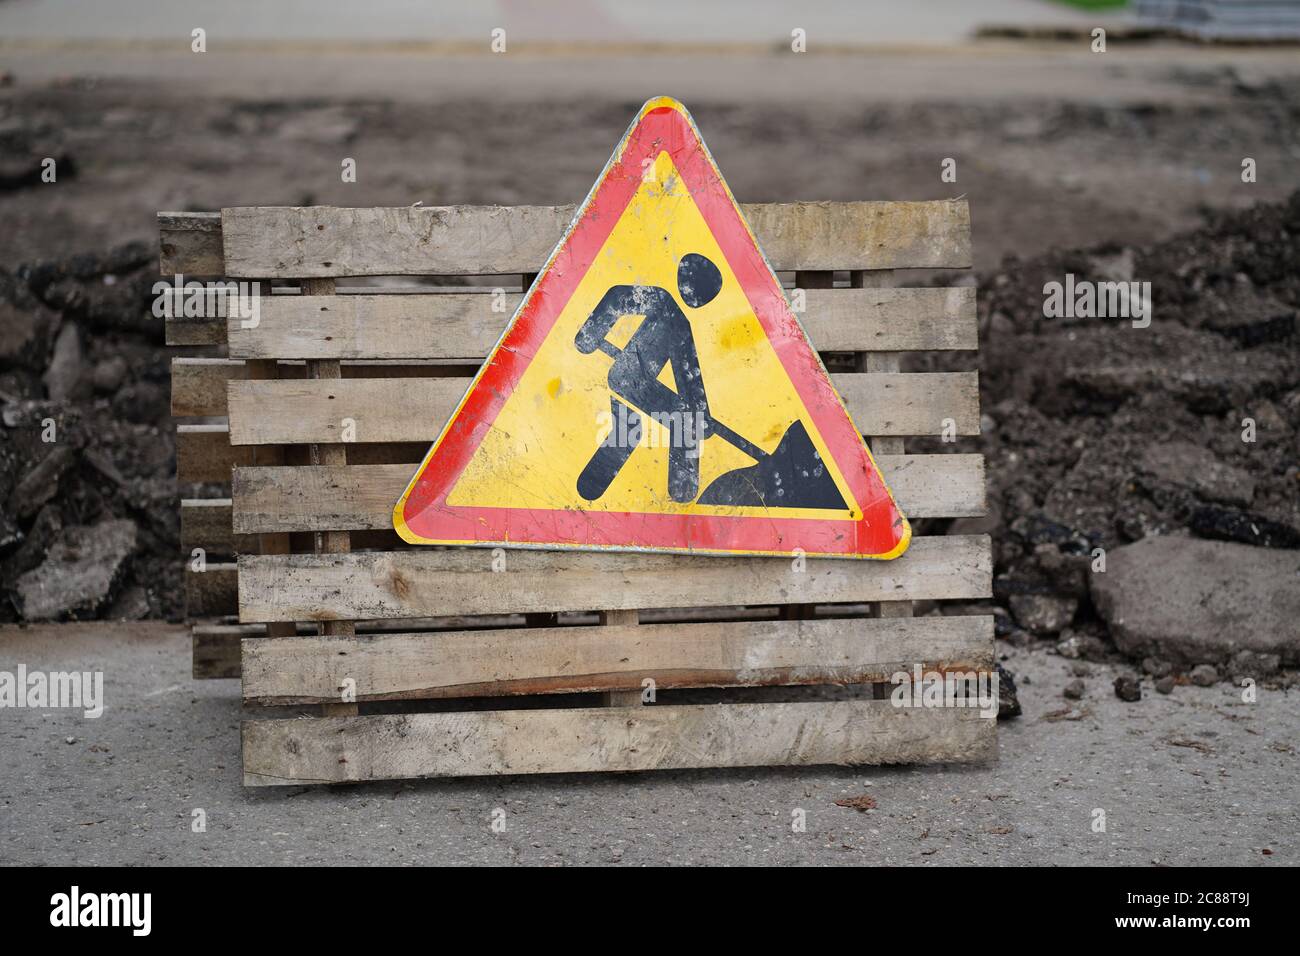 Sign of road work to inform traffic participants about carrying out repairs on road. Concept of careful and attentive driving. Stock Photo